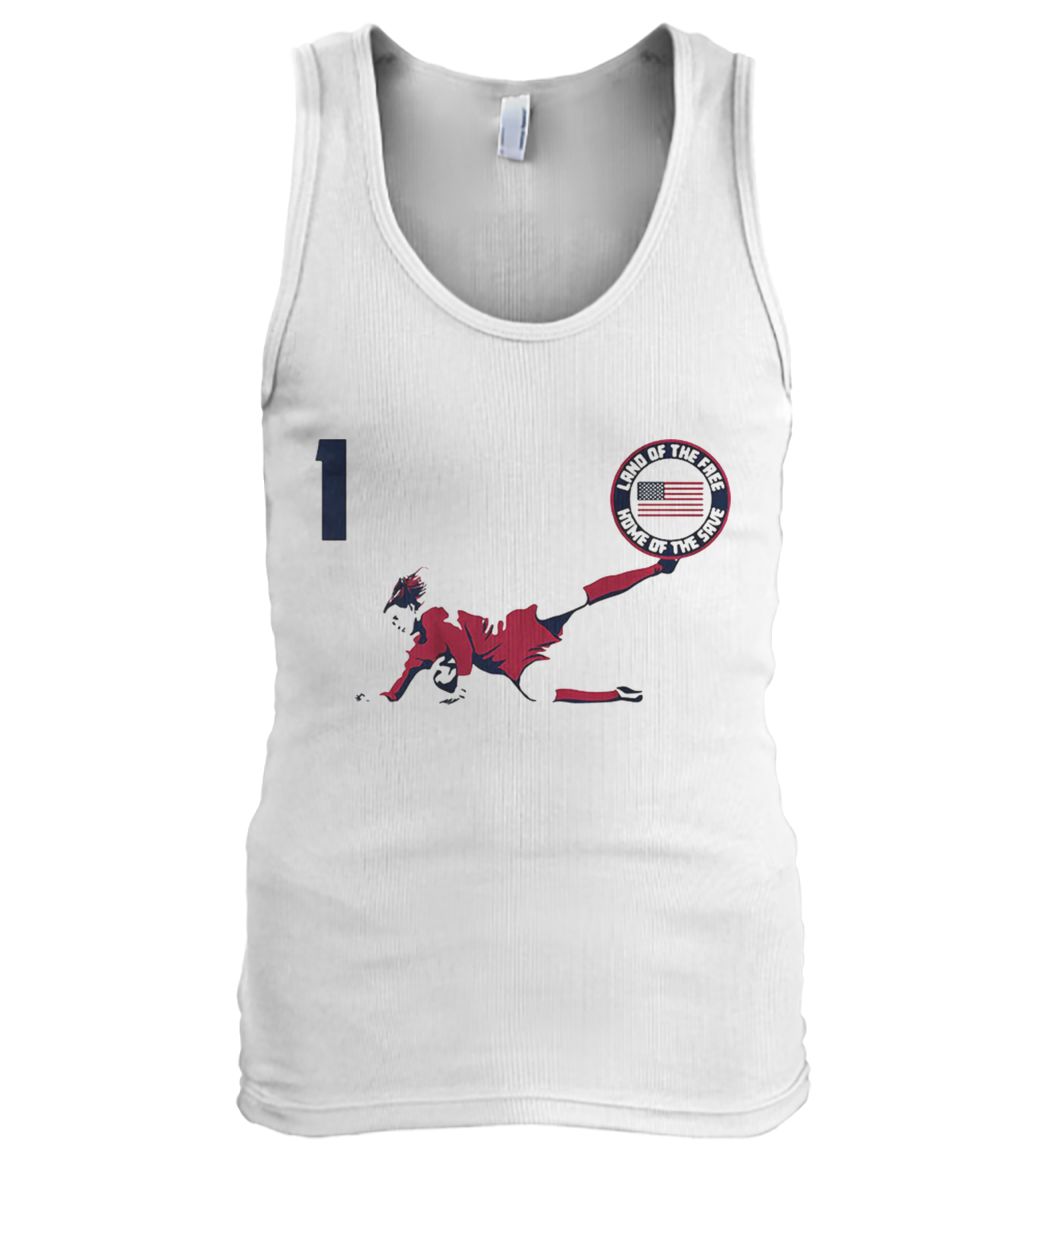 Alyssa Naeher land of the free home of the save men's tank top